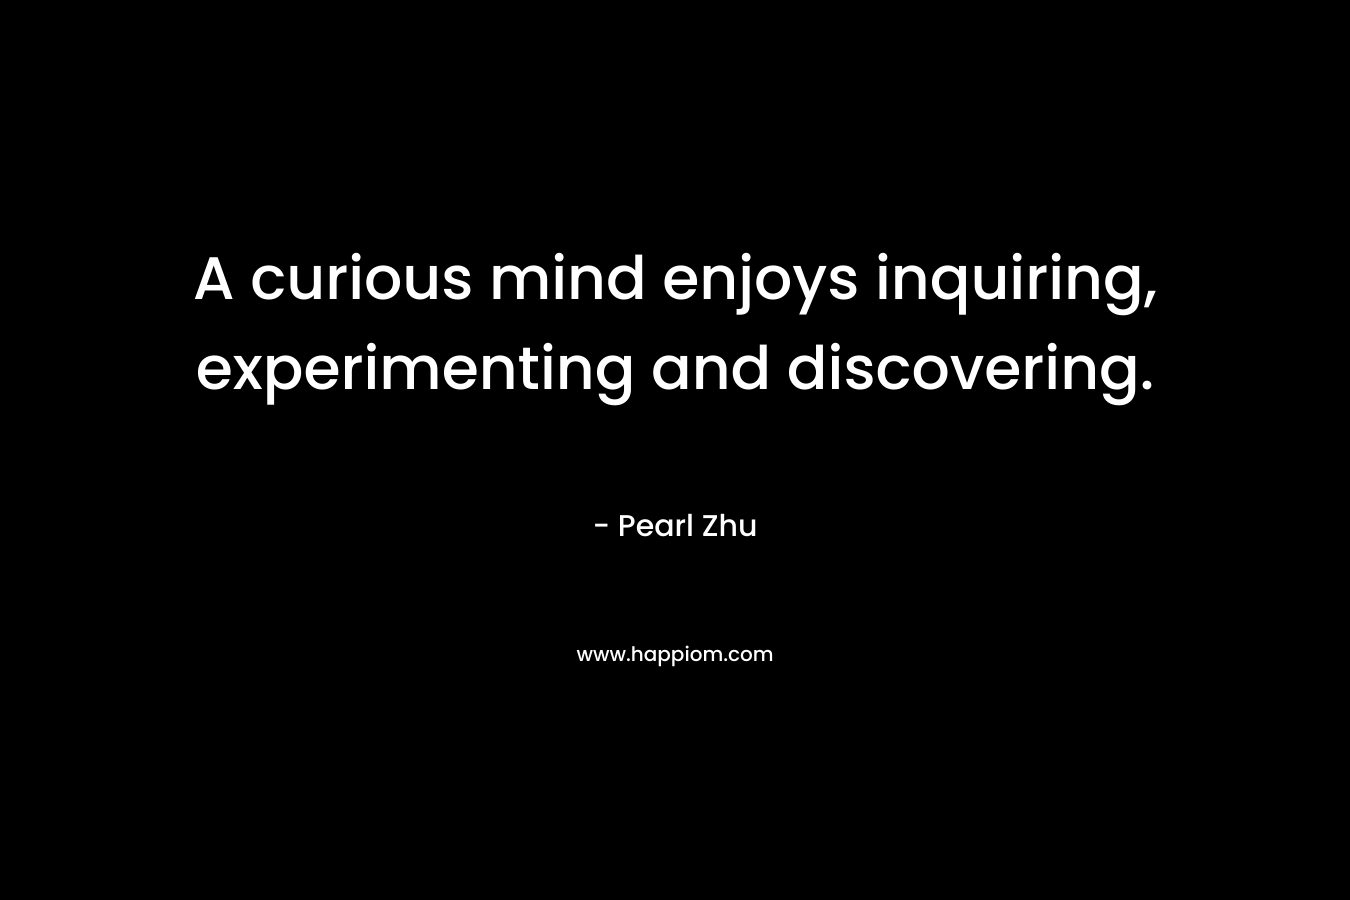 A curious mind enjoys inquiring, experimenting and discovering. – Pearl Zhu